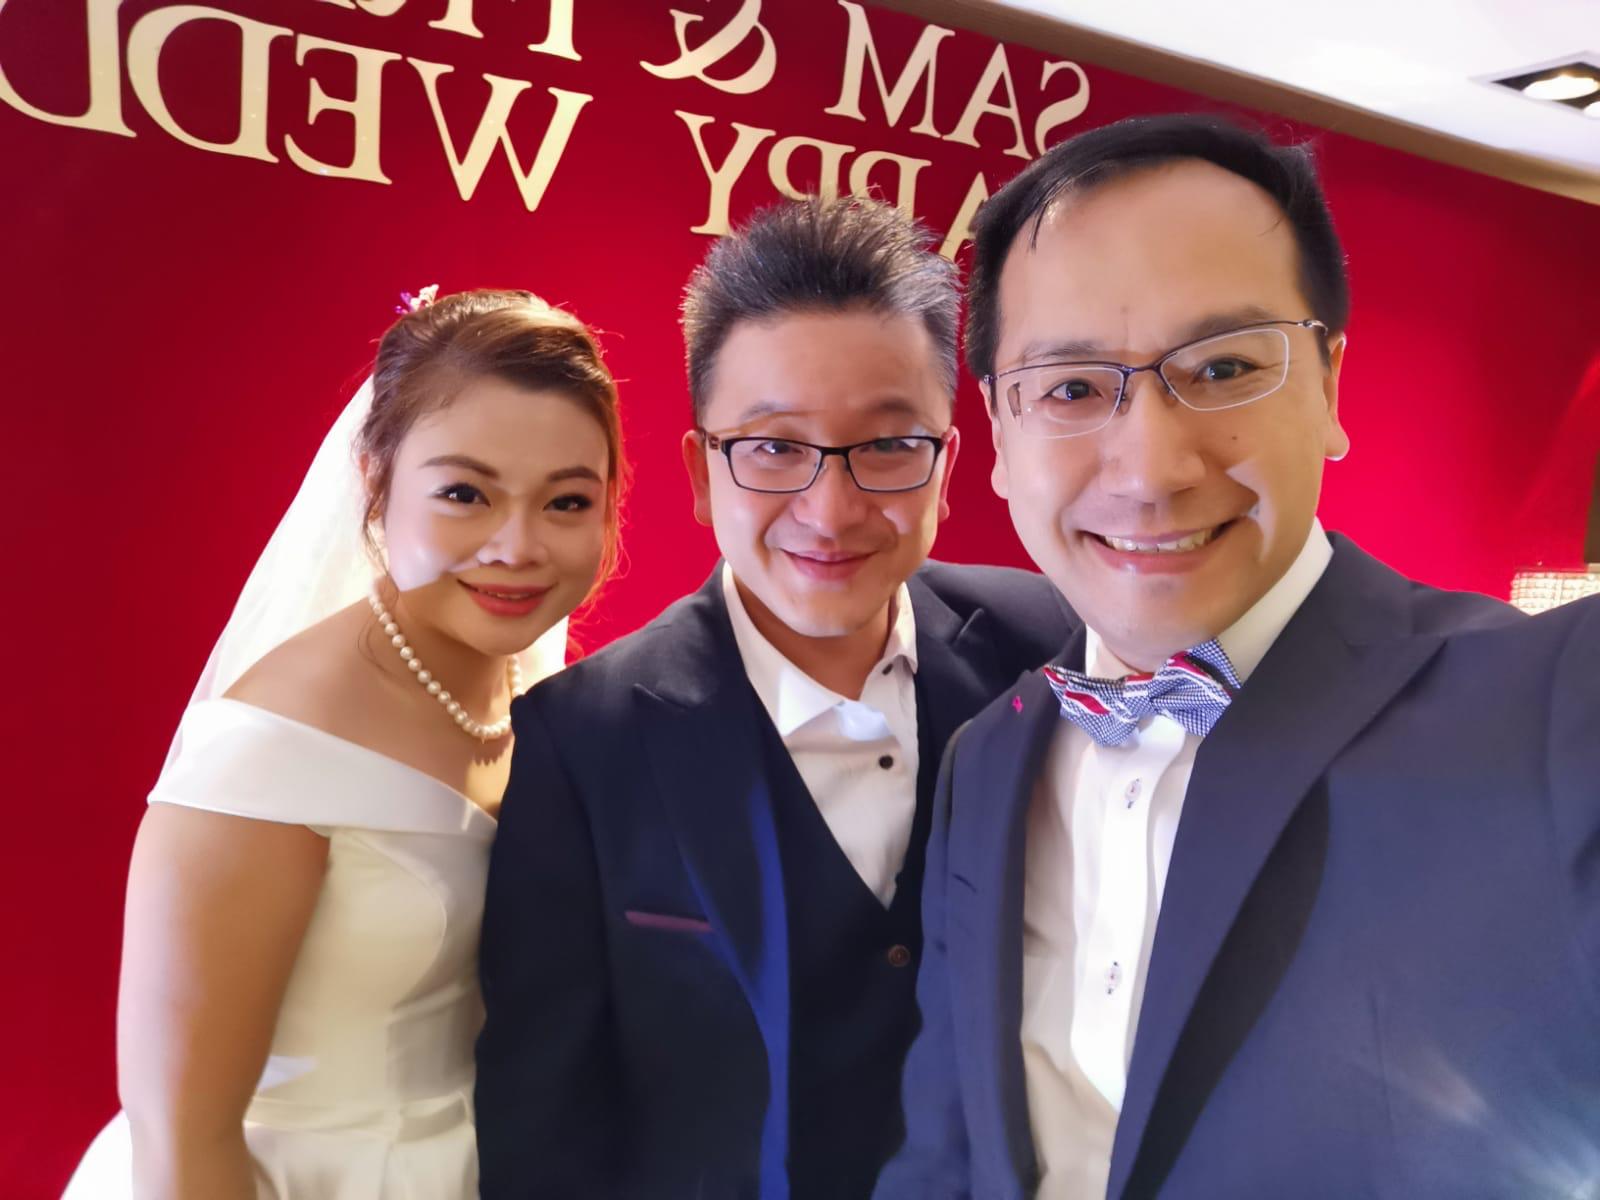 civil celebrant of marriages pierre sun and newly-wedded couple